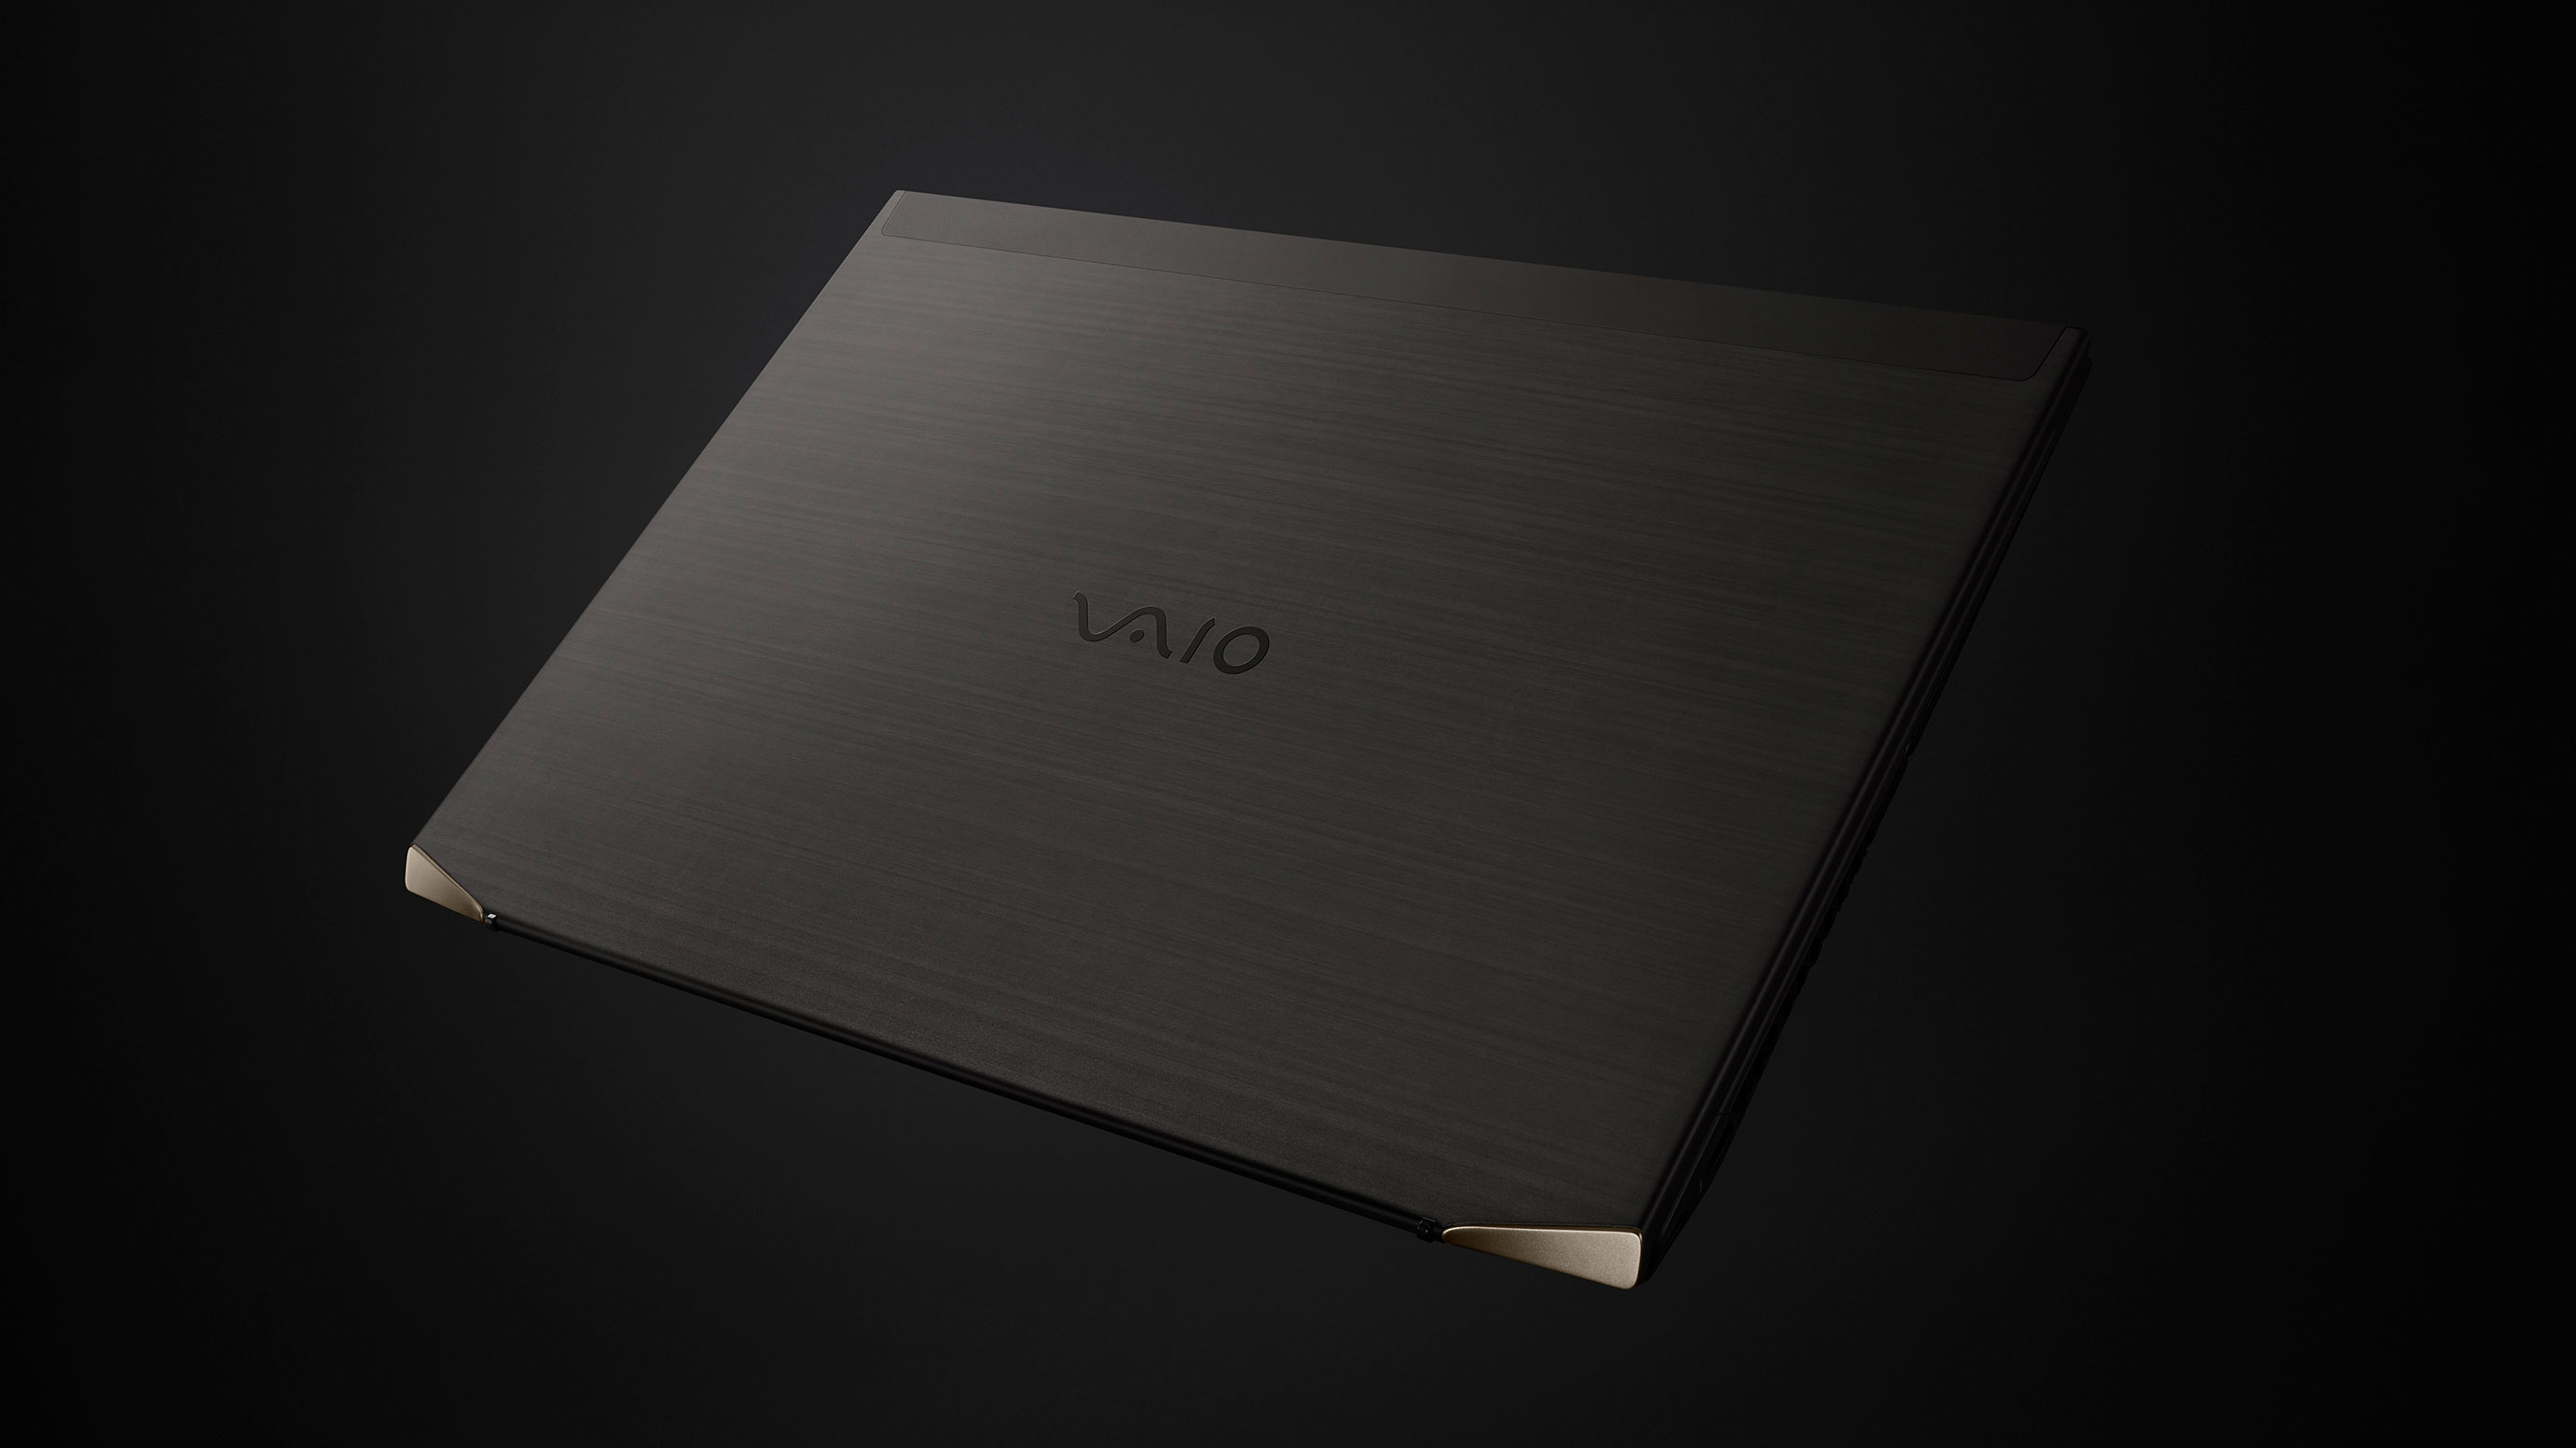 The Vaio Z is the world’s first laptop with a “3D moulded full carbon fibre body”